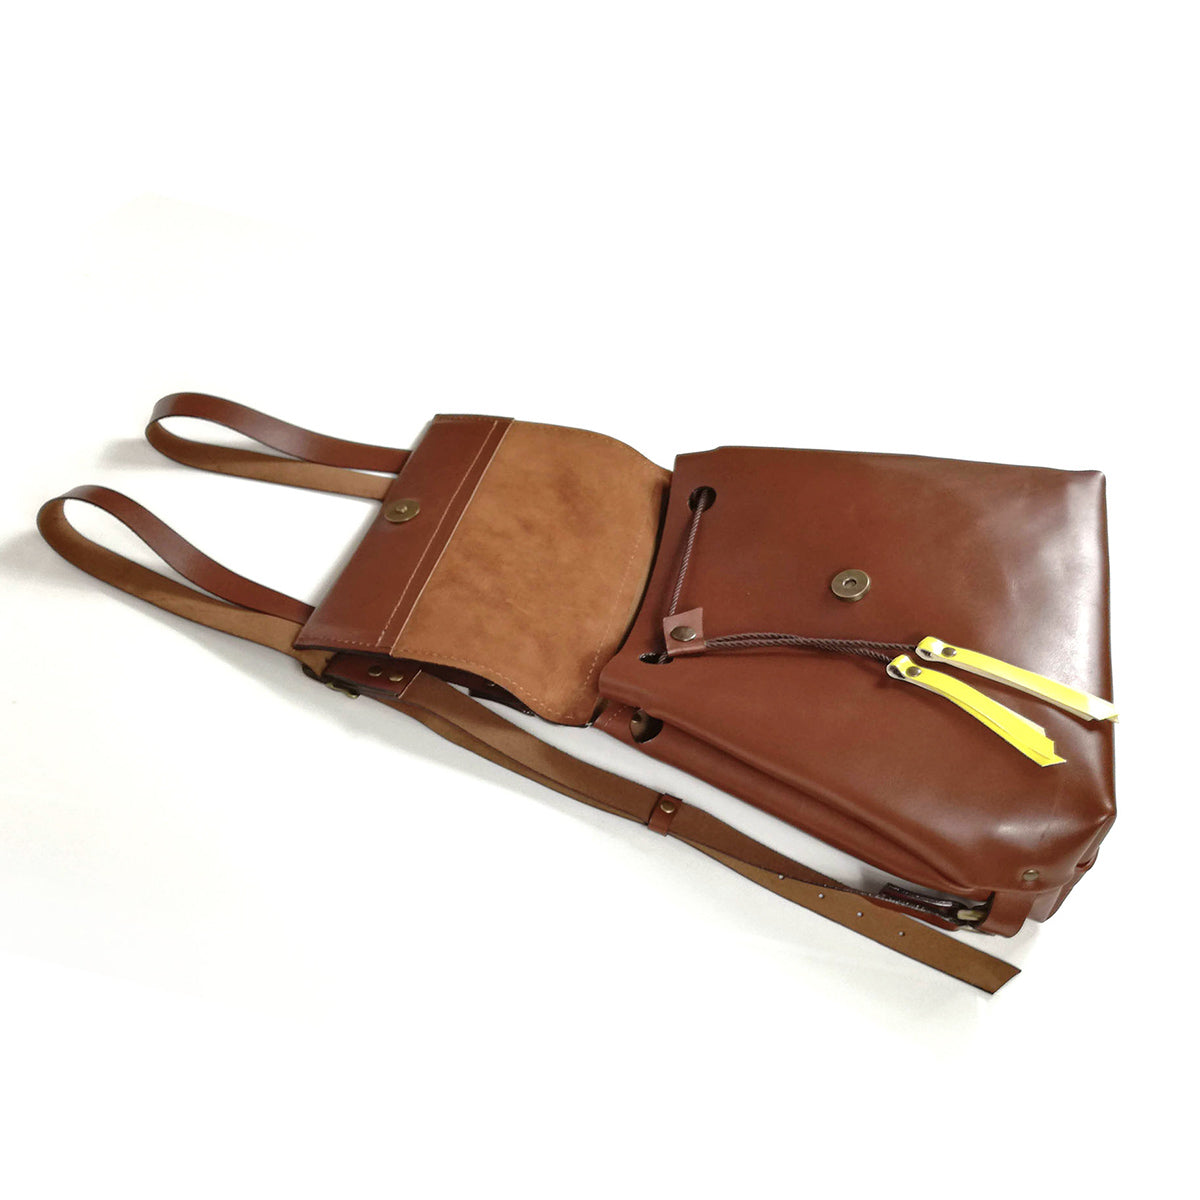 Brown leather convertible backpack | Alice